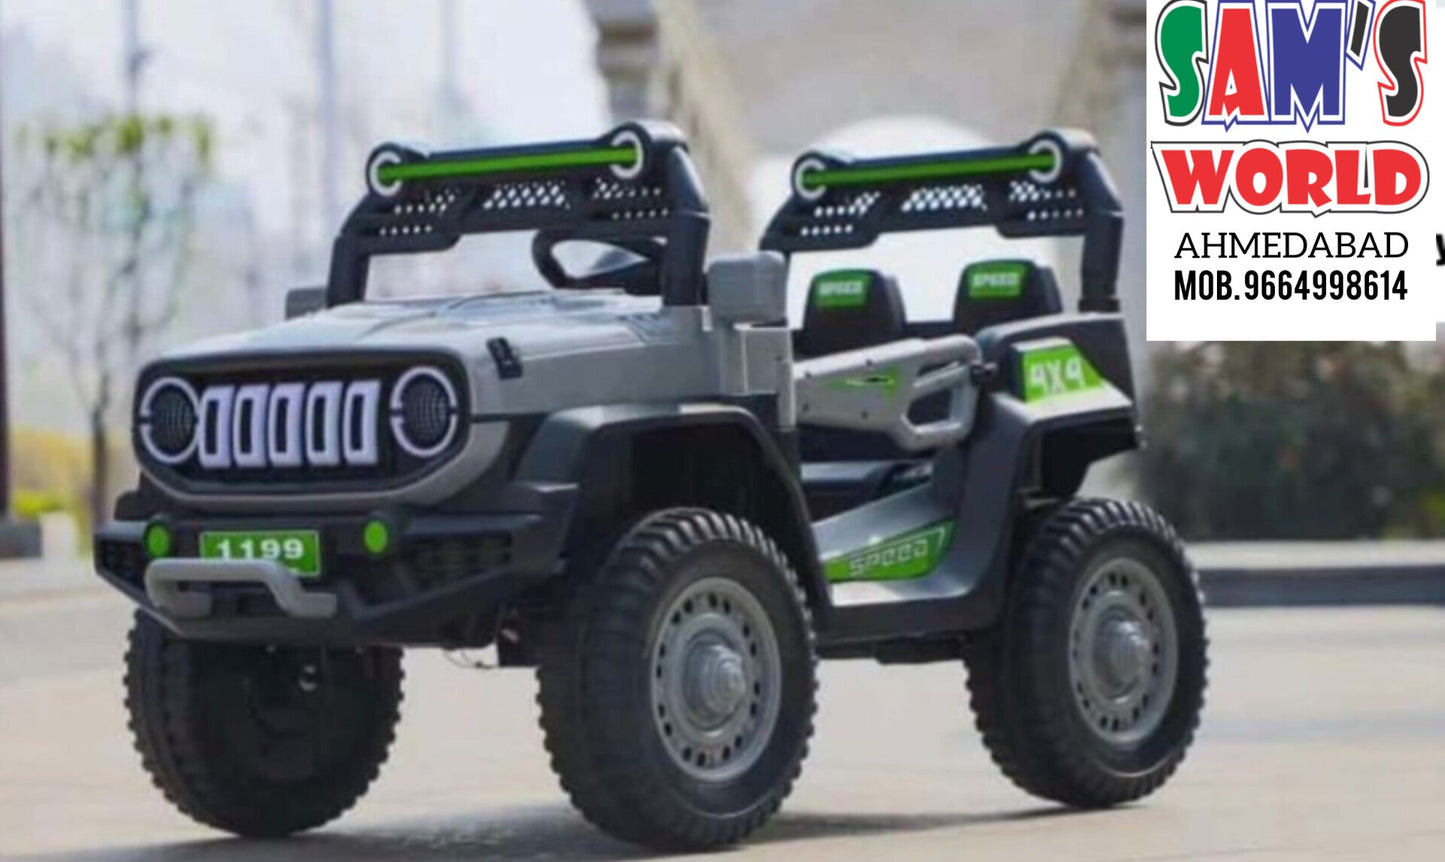 Sams world Kids Electric Cars Four-wheel Drive 1-10 Years Old Children RC Riding Off-road Vehicle 12V - samstoy.in